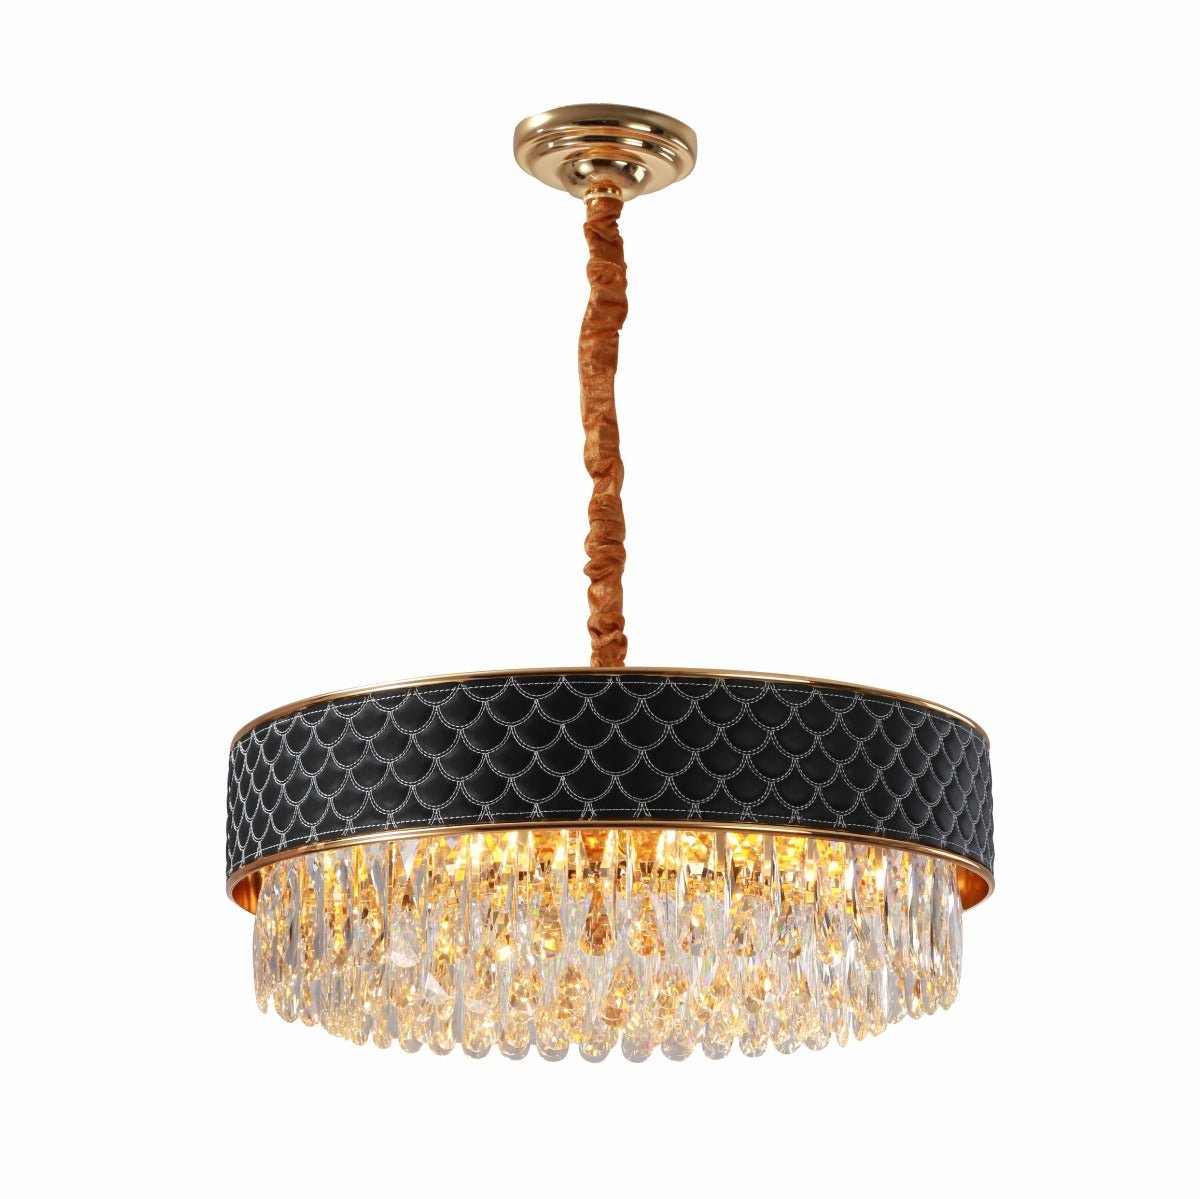 Main image of Gold Metal Black Leather Crystal Chandelier D600 with 12xE14 Fitting | TEKLED 158-19858